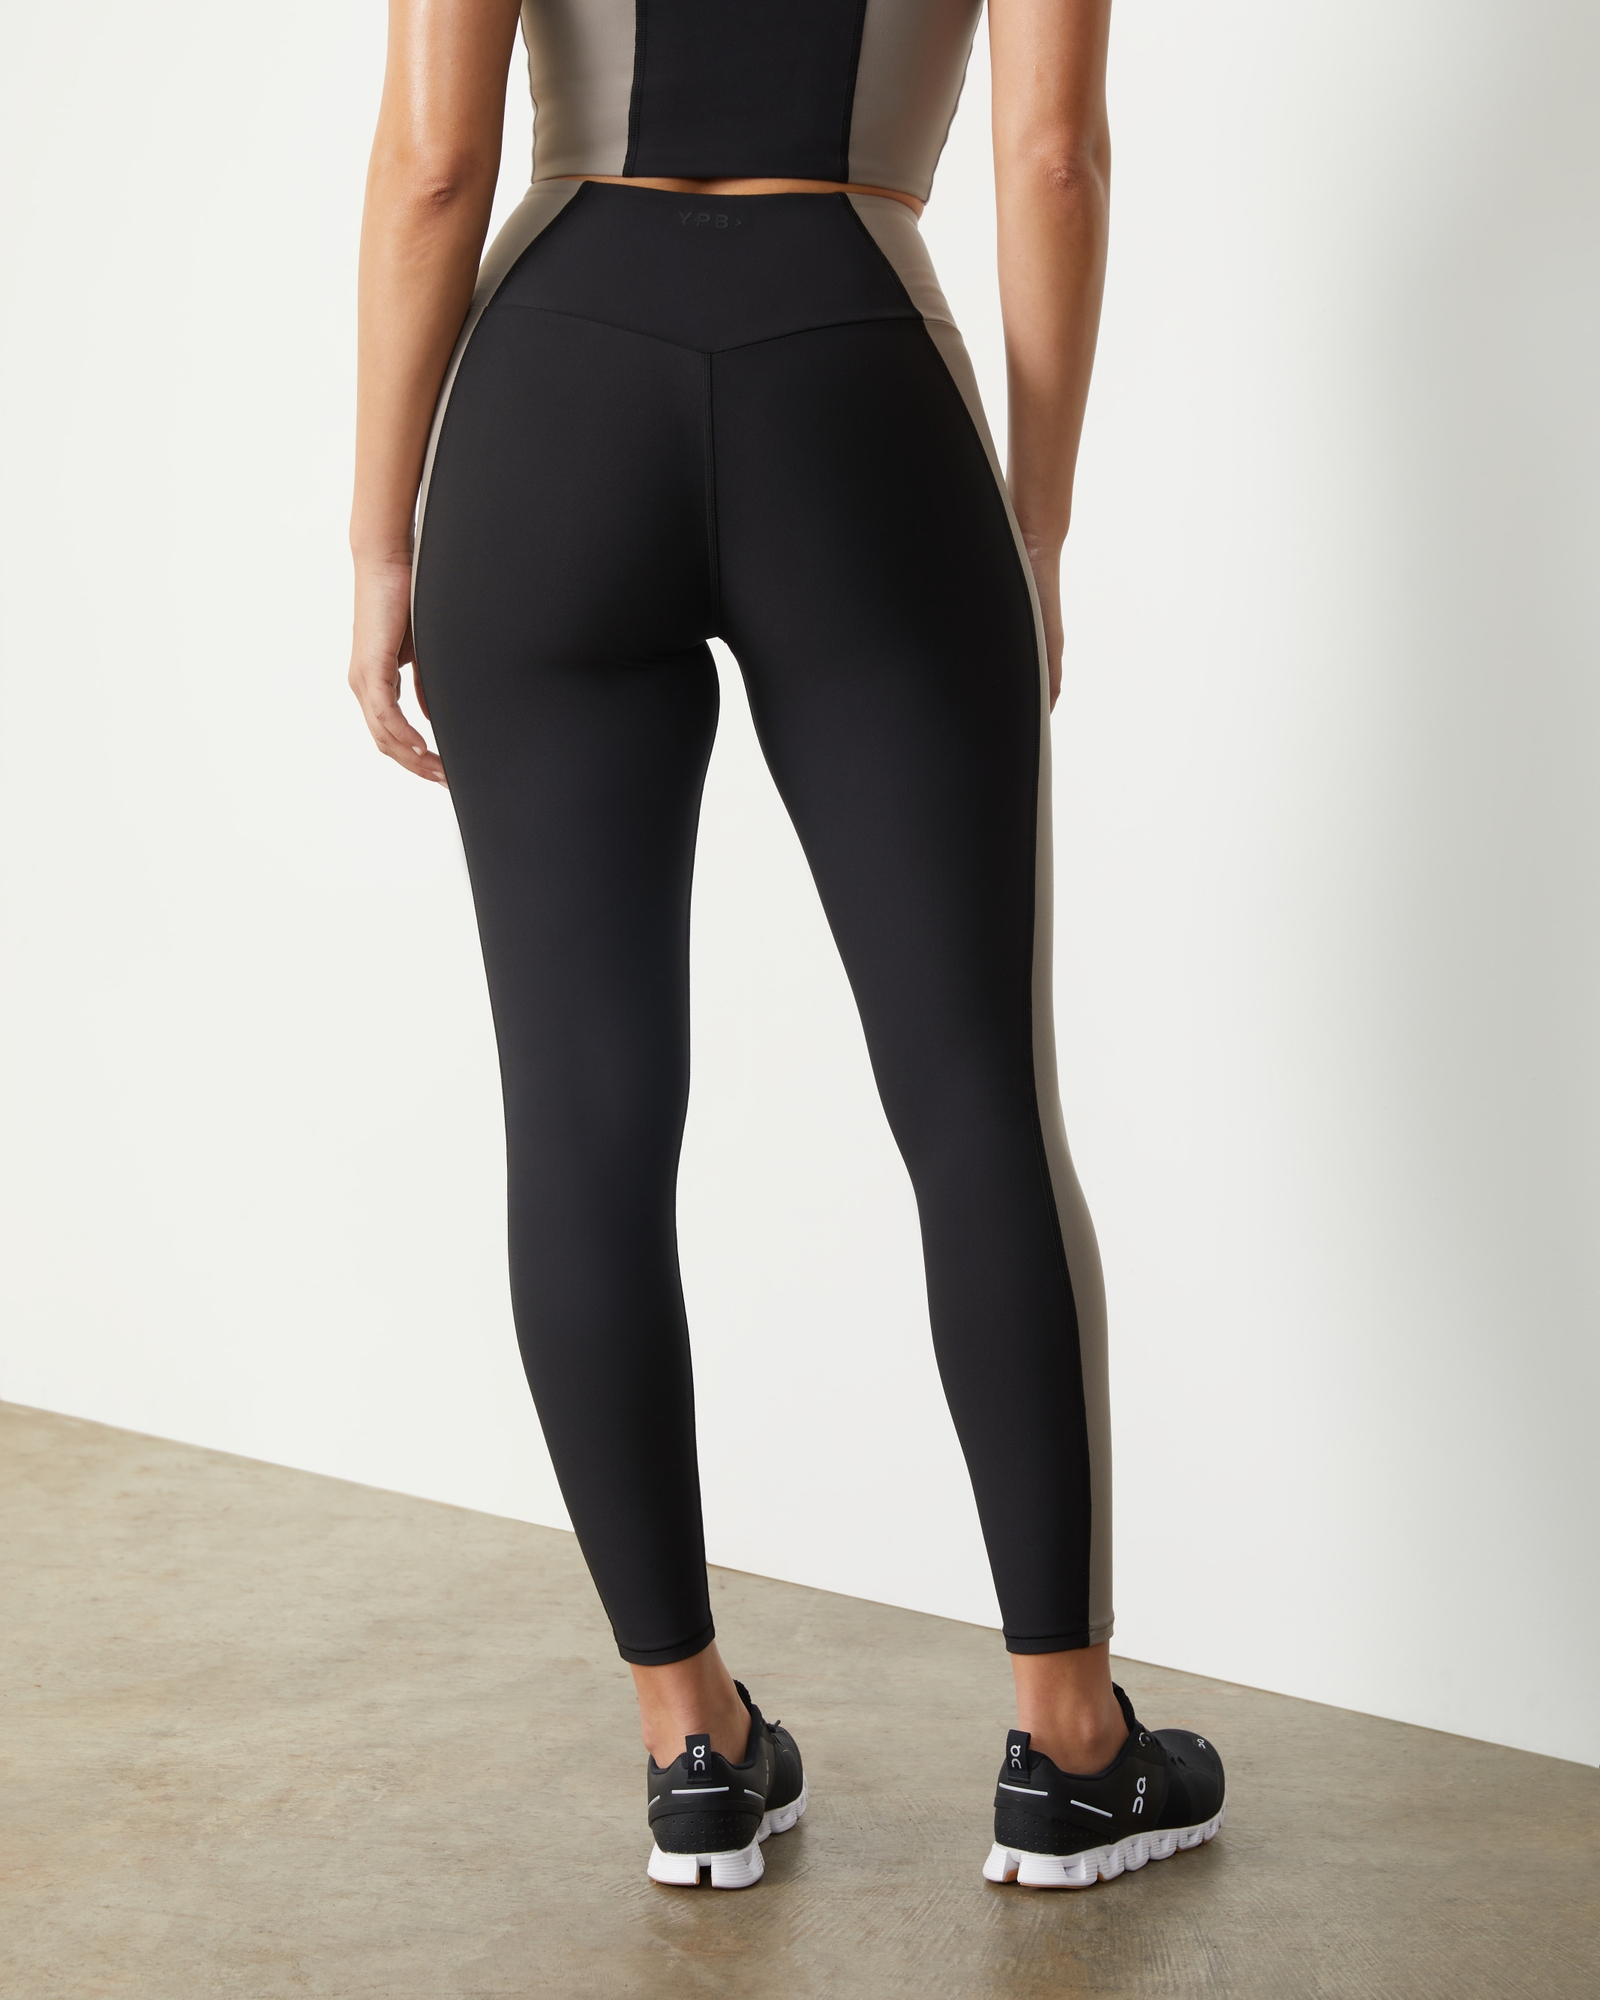 Women's YPB sculptLUX Ruched V-Waist Flare Legging, Women's Clearance